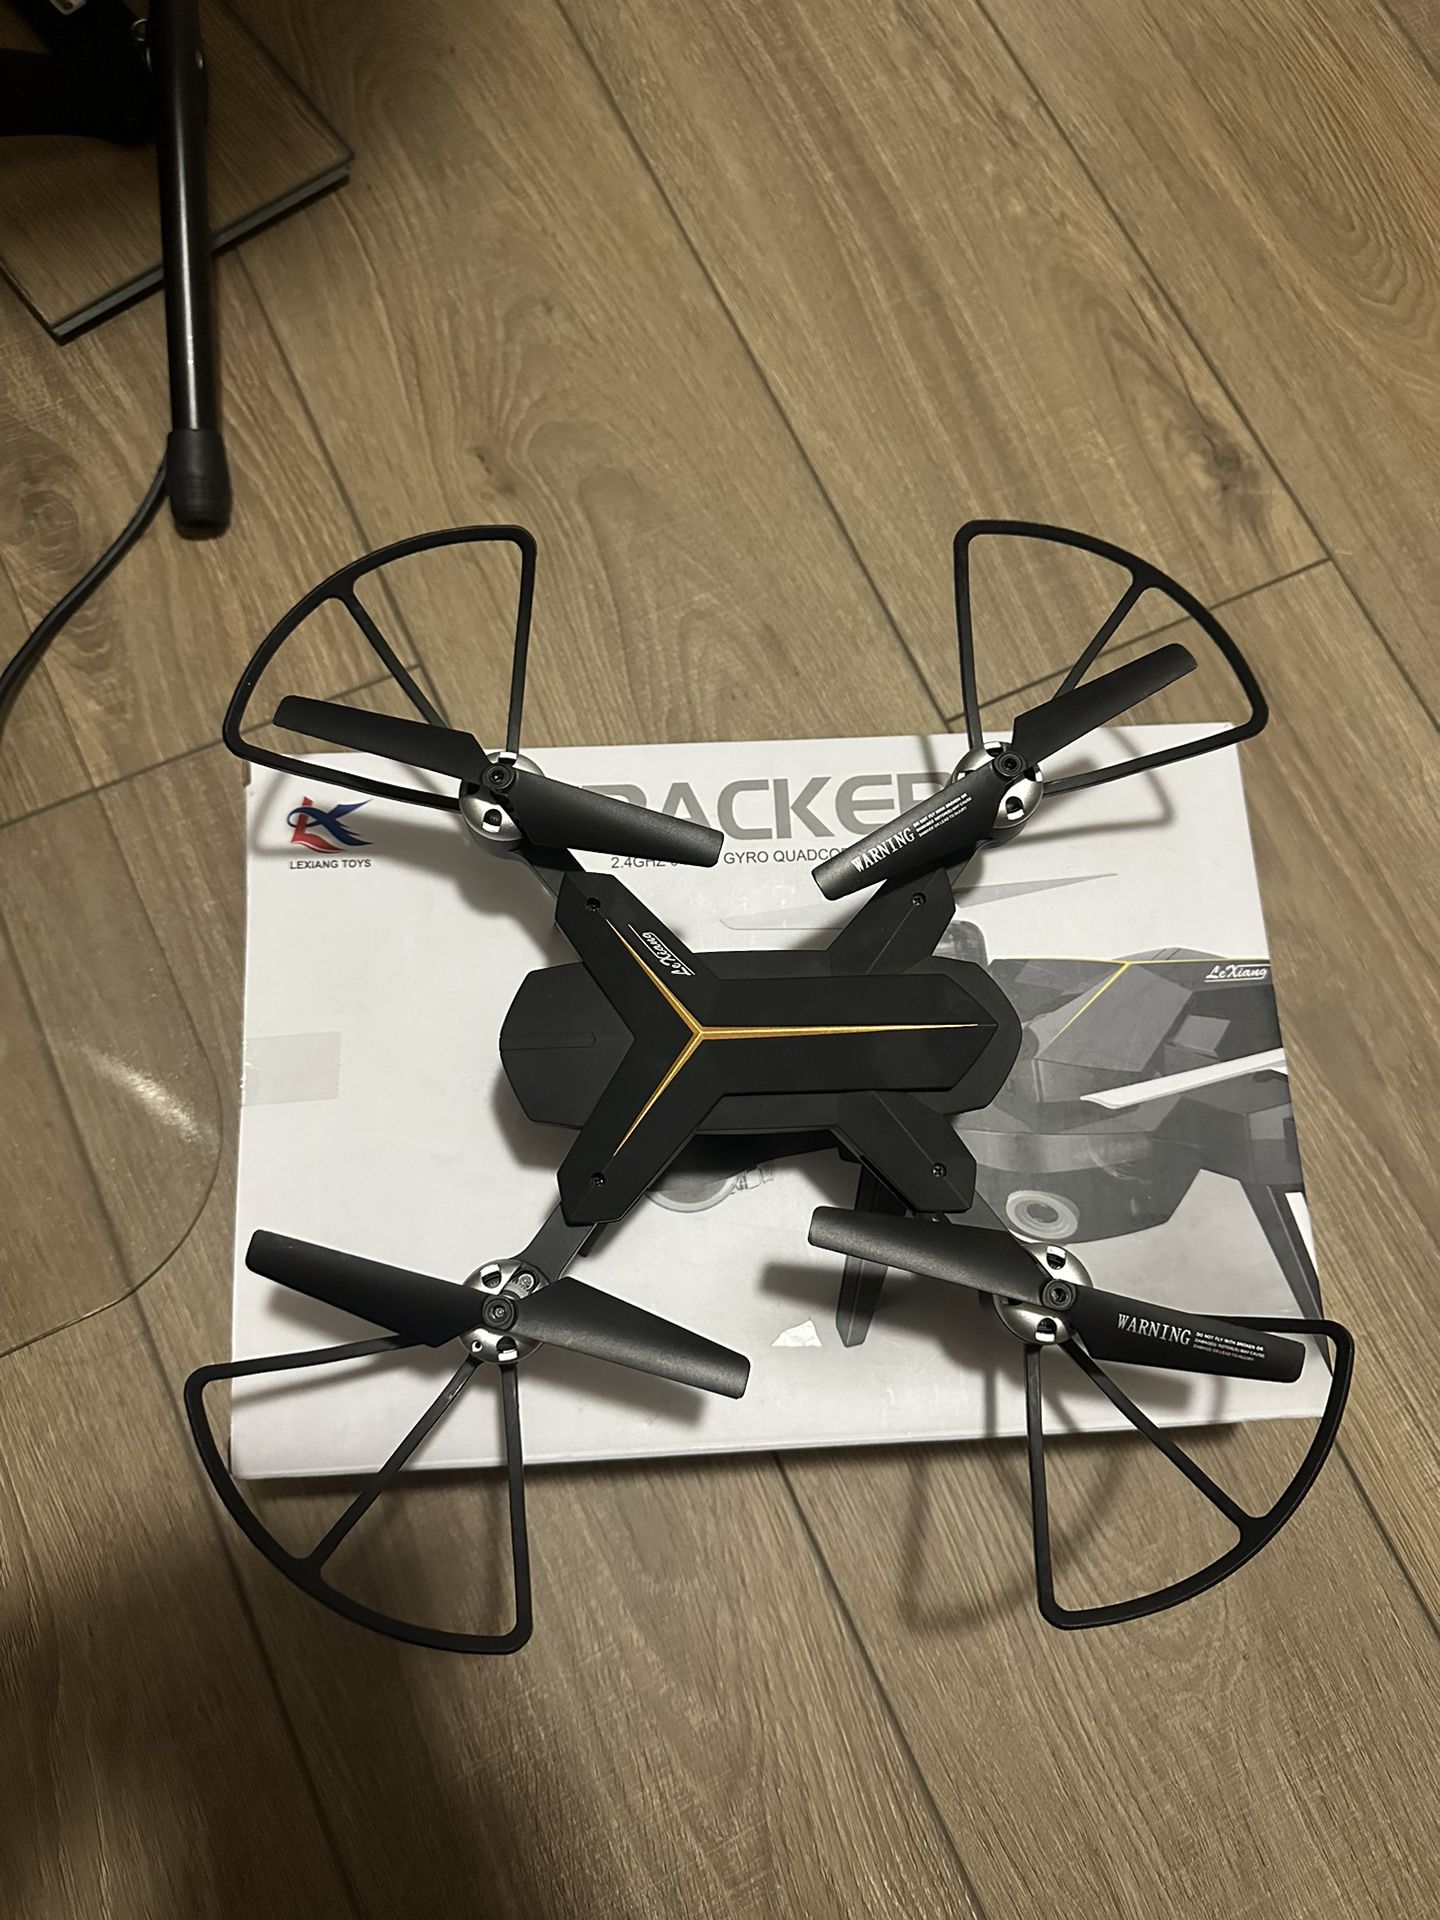 Rc Drone